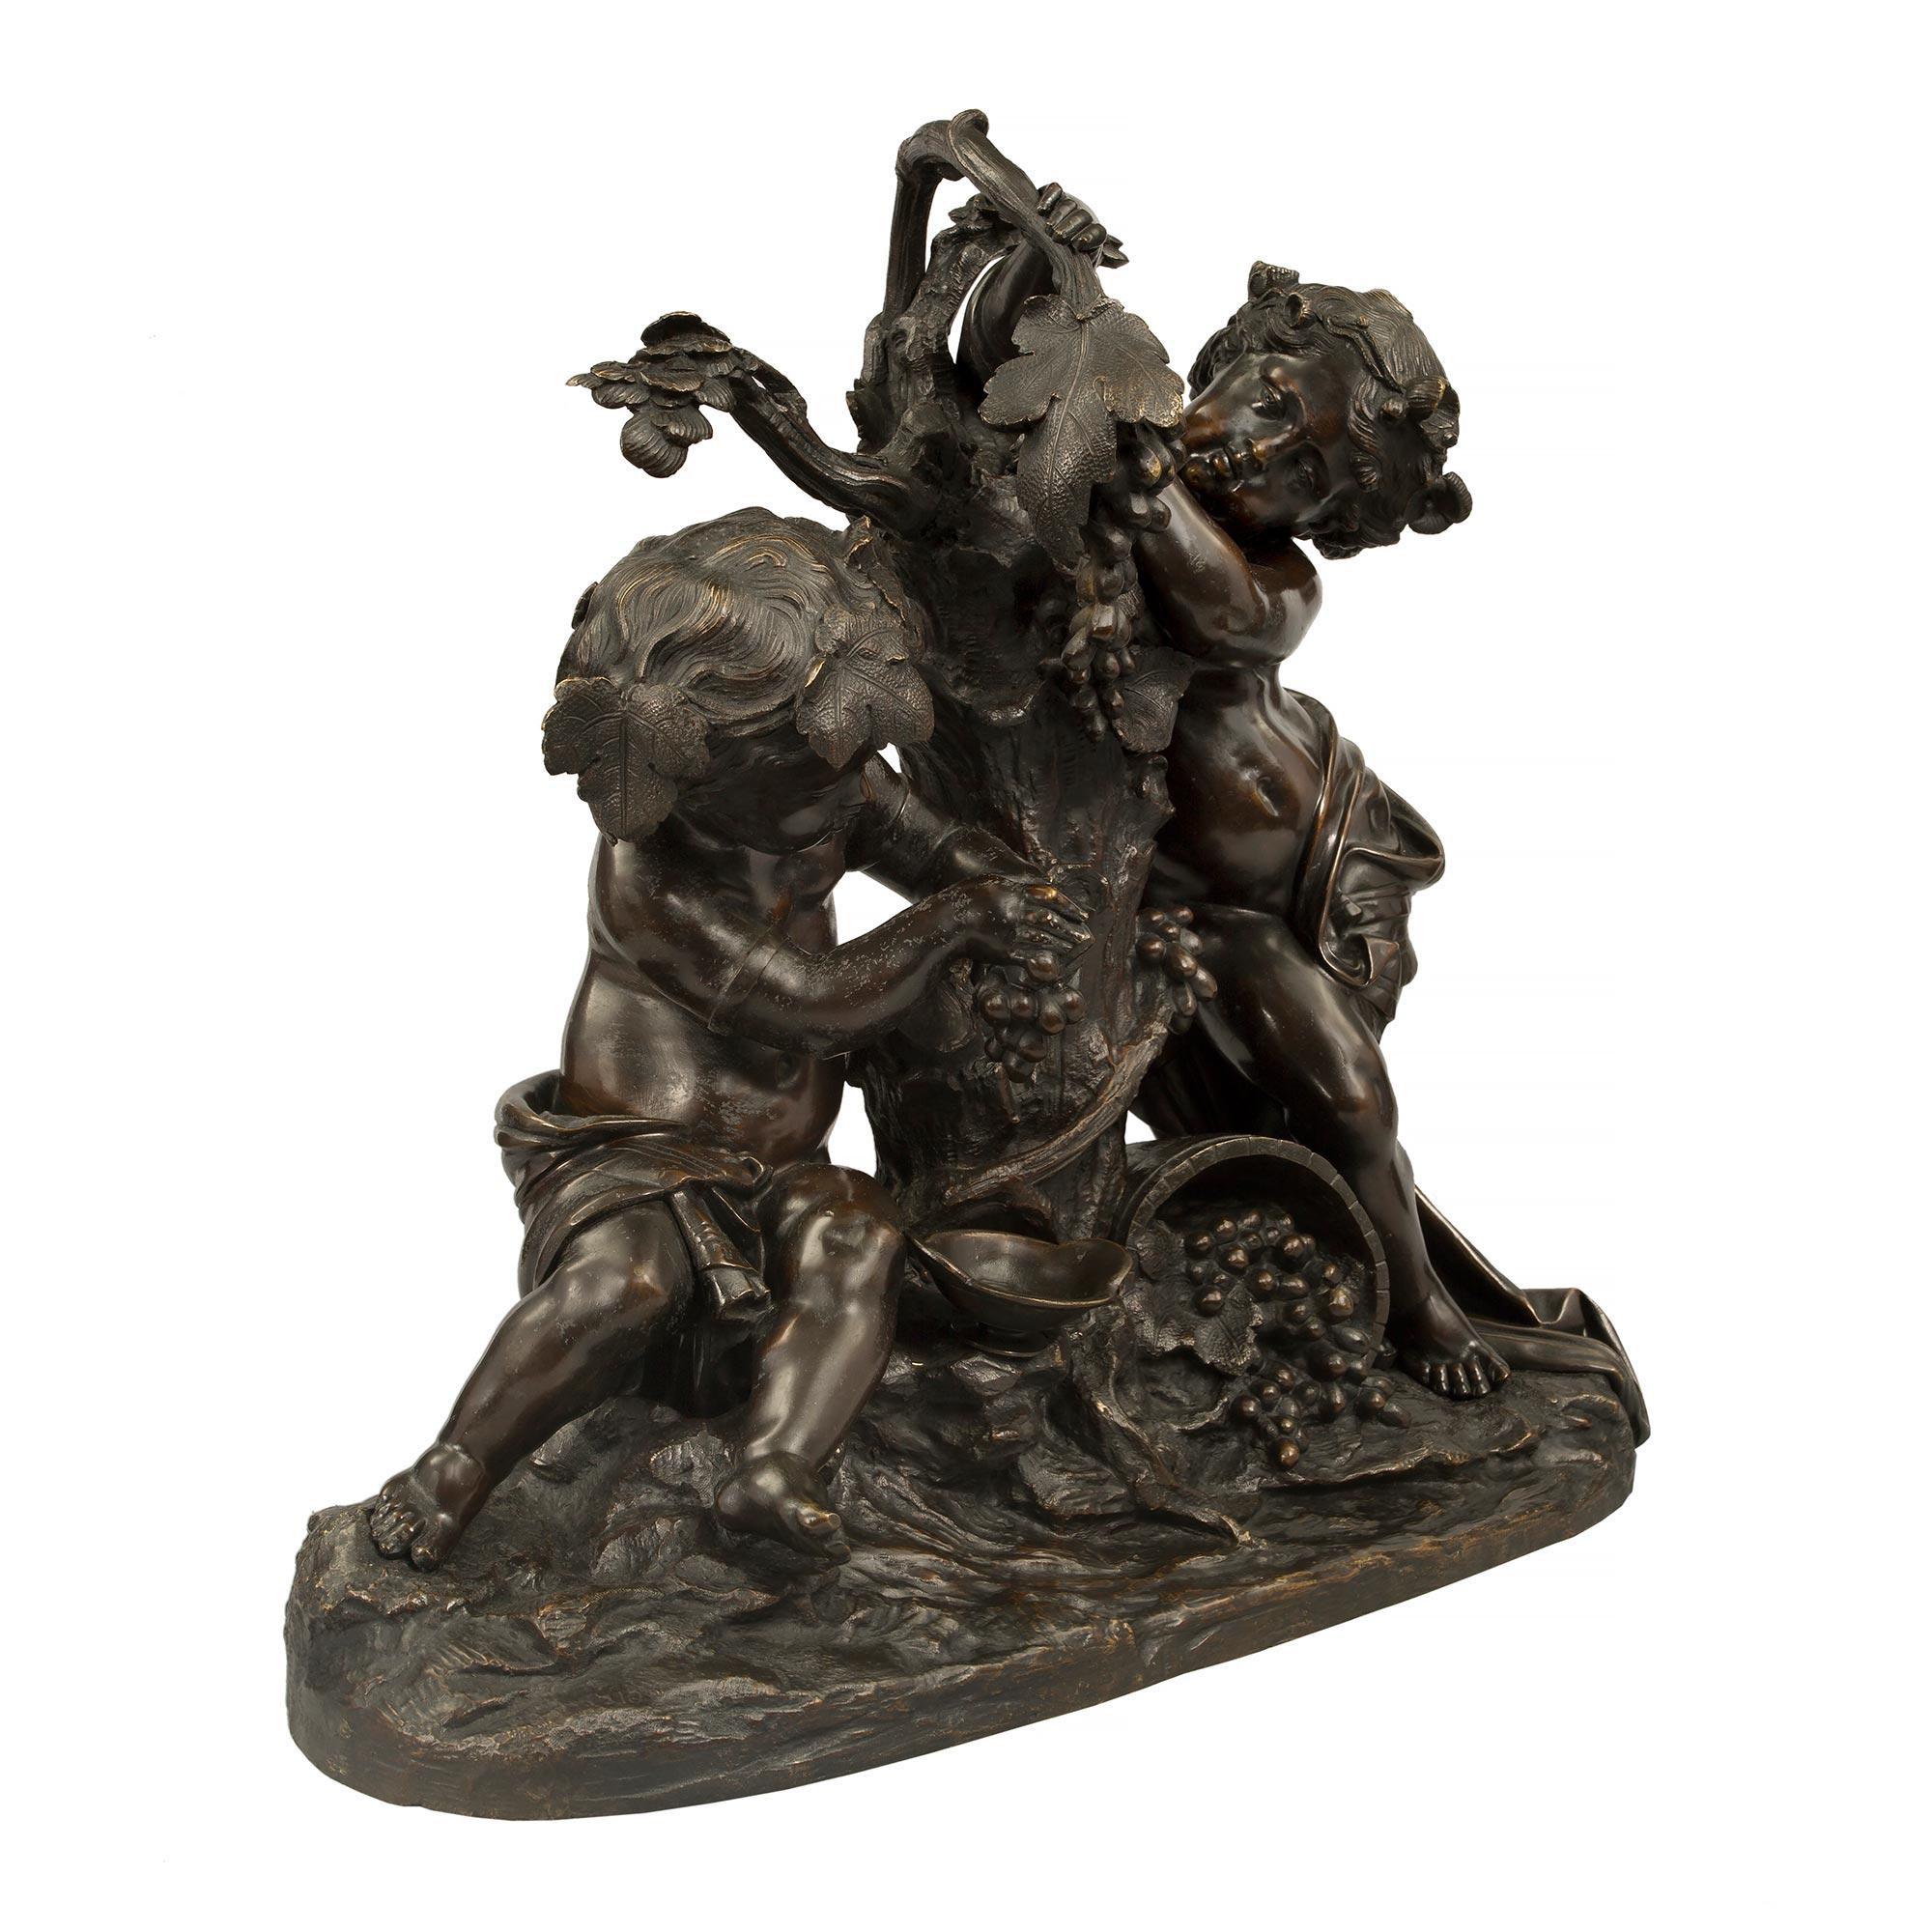 A striking and high quality French 19th century Louis XVI st. patinated bronze statue of two cherubs making wine, signed Clodion. The statue is raised by an oblong shaped base with a wonderfully executed terrain design. Above are two most charming